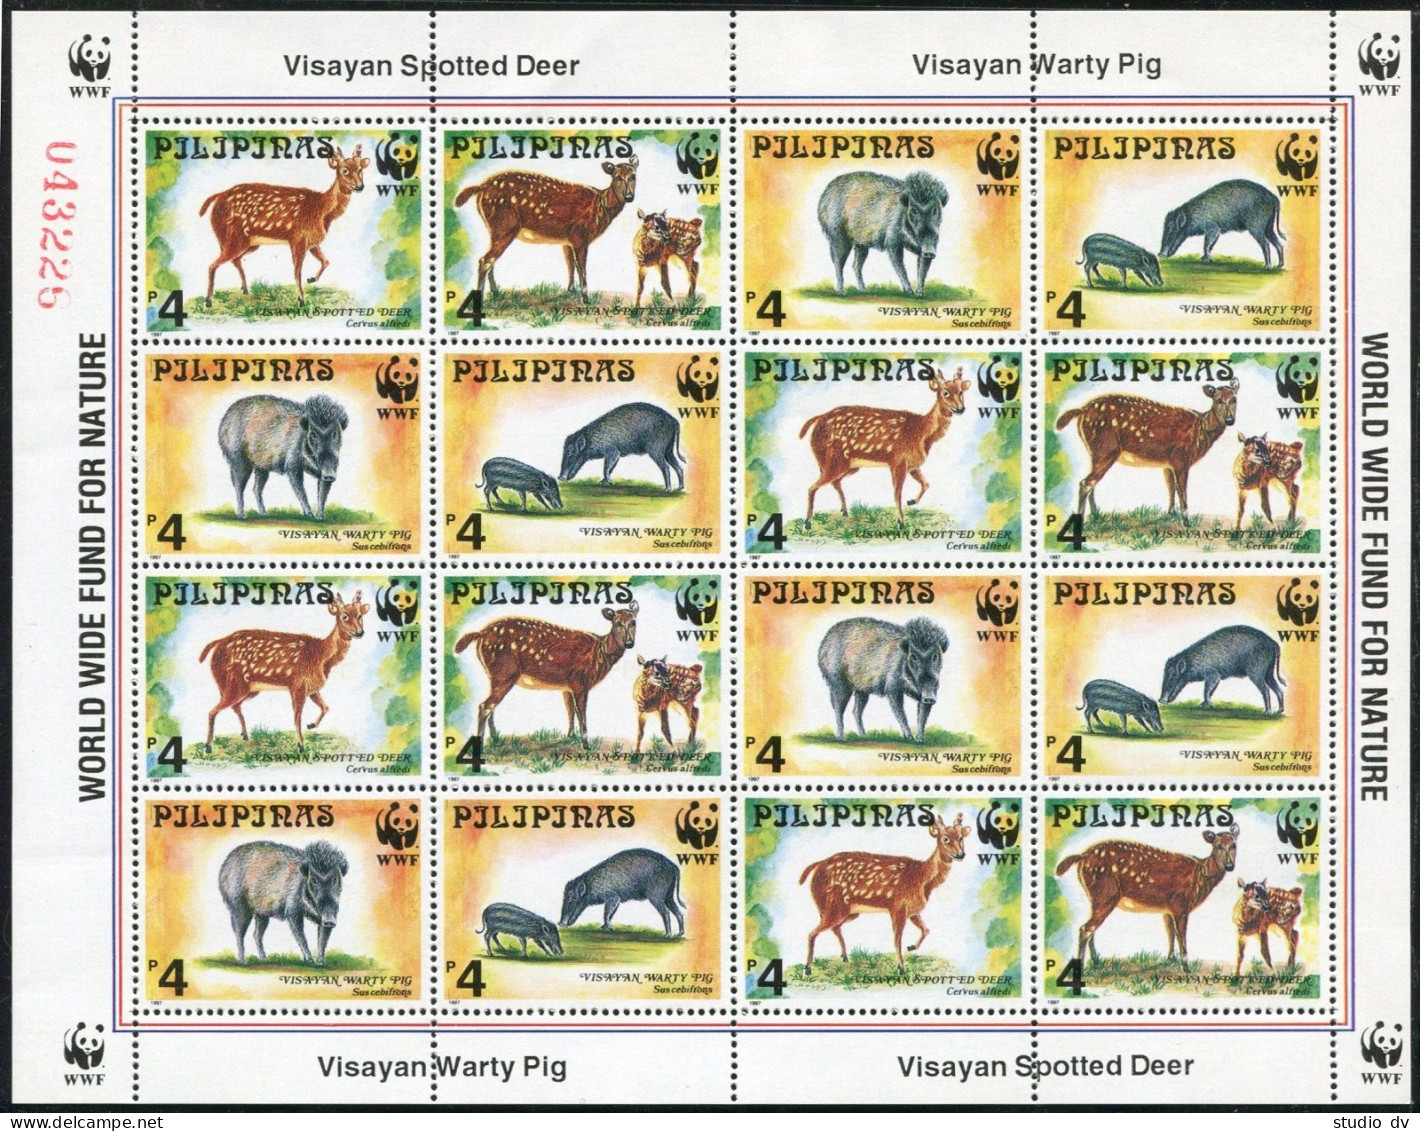 Philippines 2476-2479b Sheet,MNH. WWF 1997.Visayan Spotted Deer.Warty Pig. - Philippines